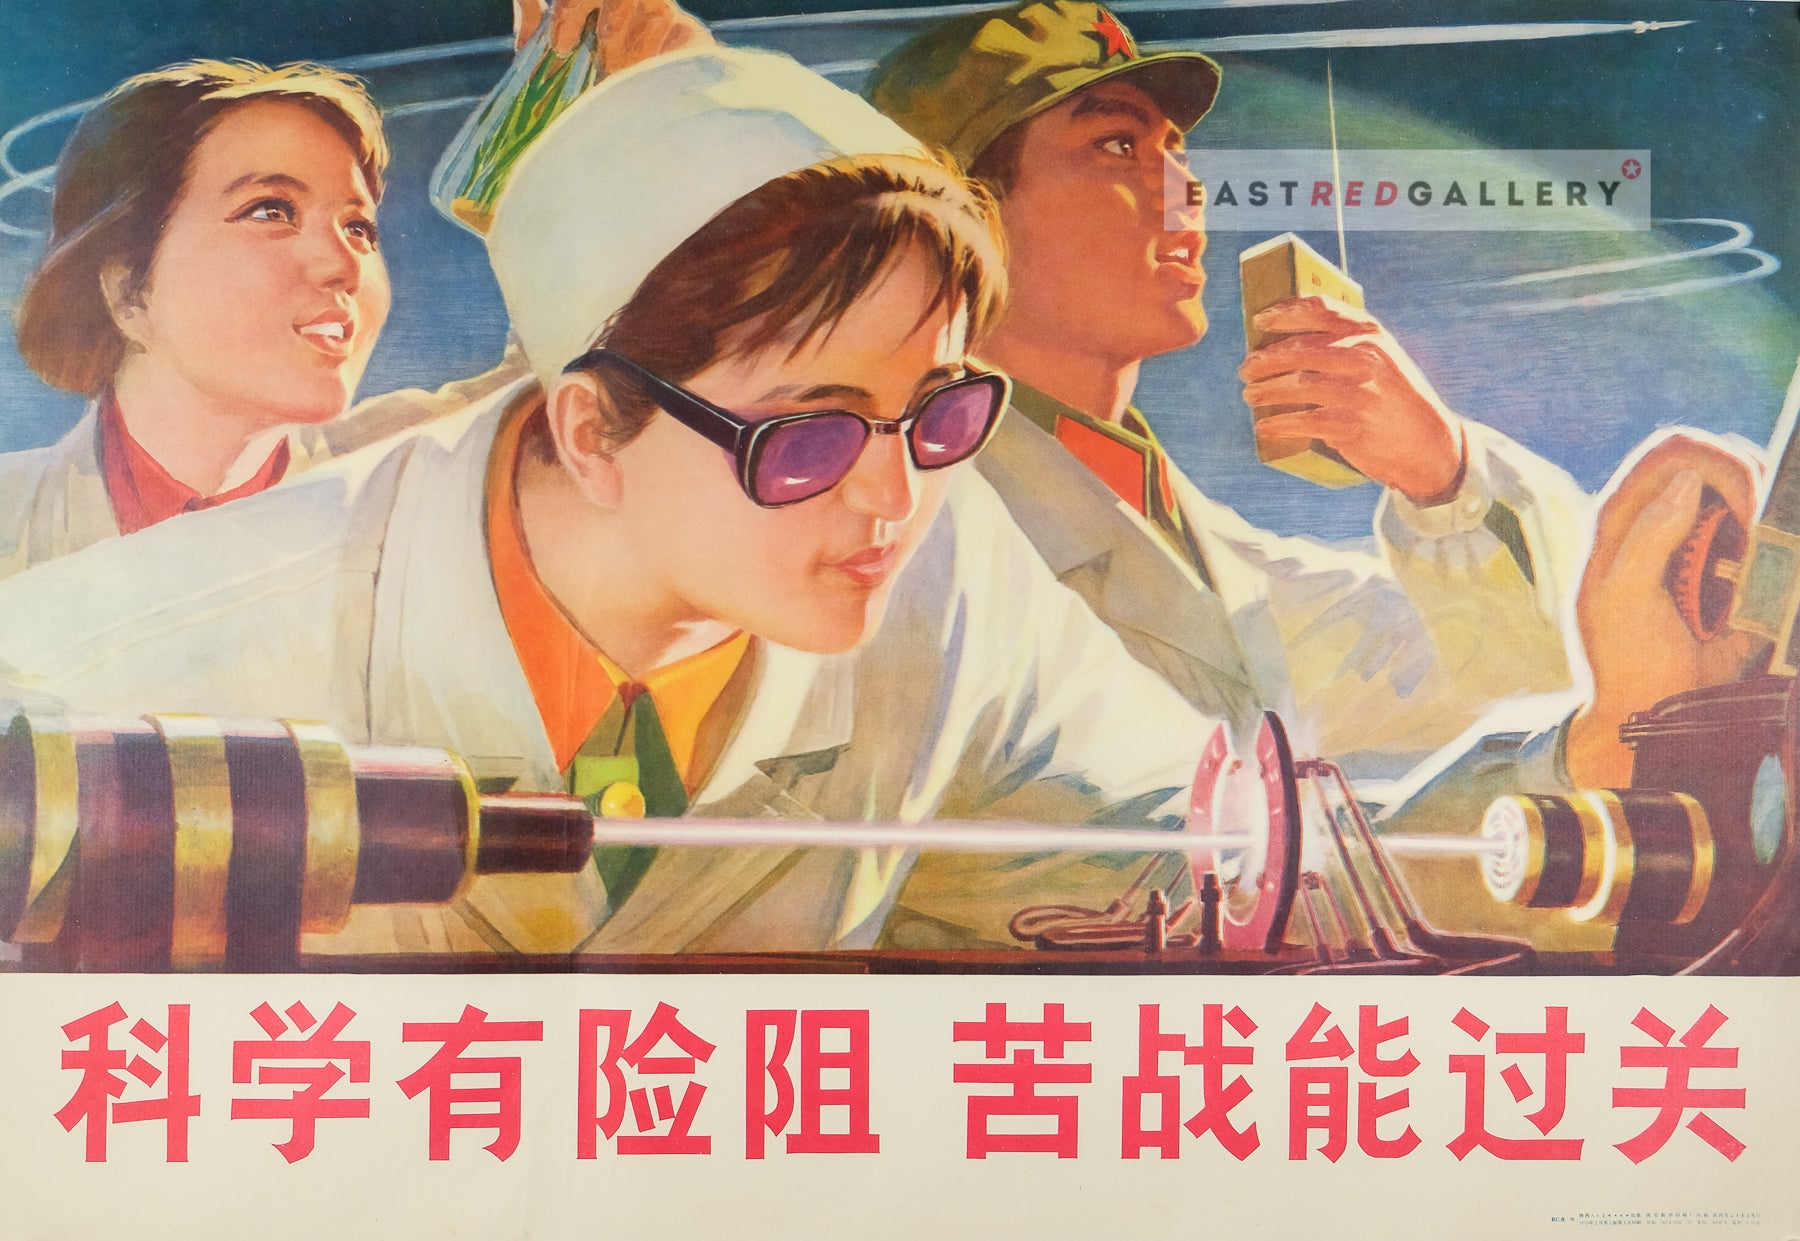 image of 1979 Chinese poster Science has dangers and difficulties, struggle hard to overcome them